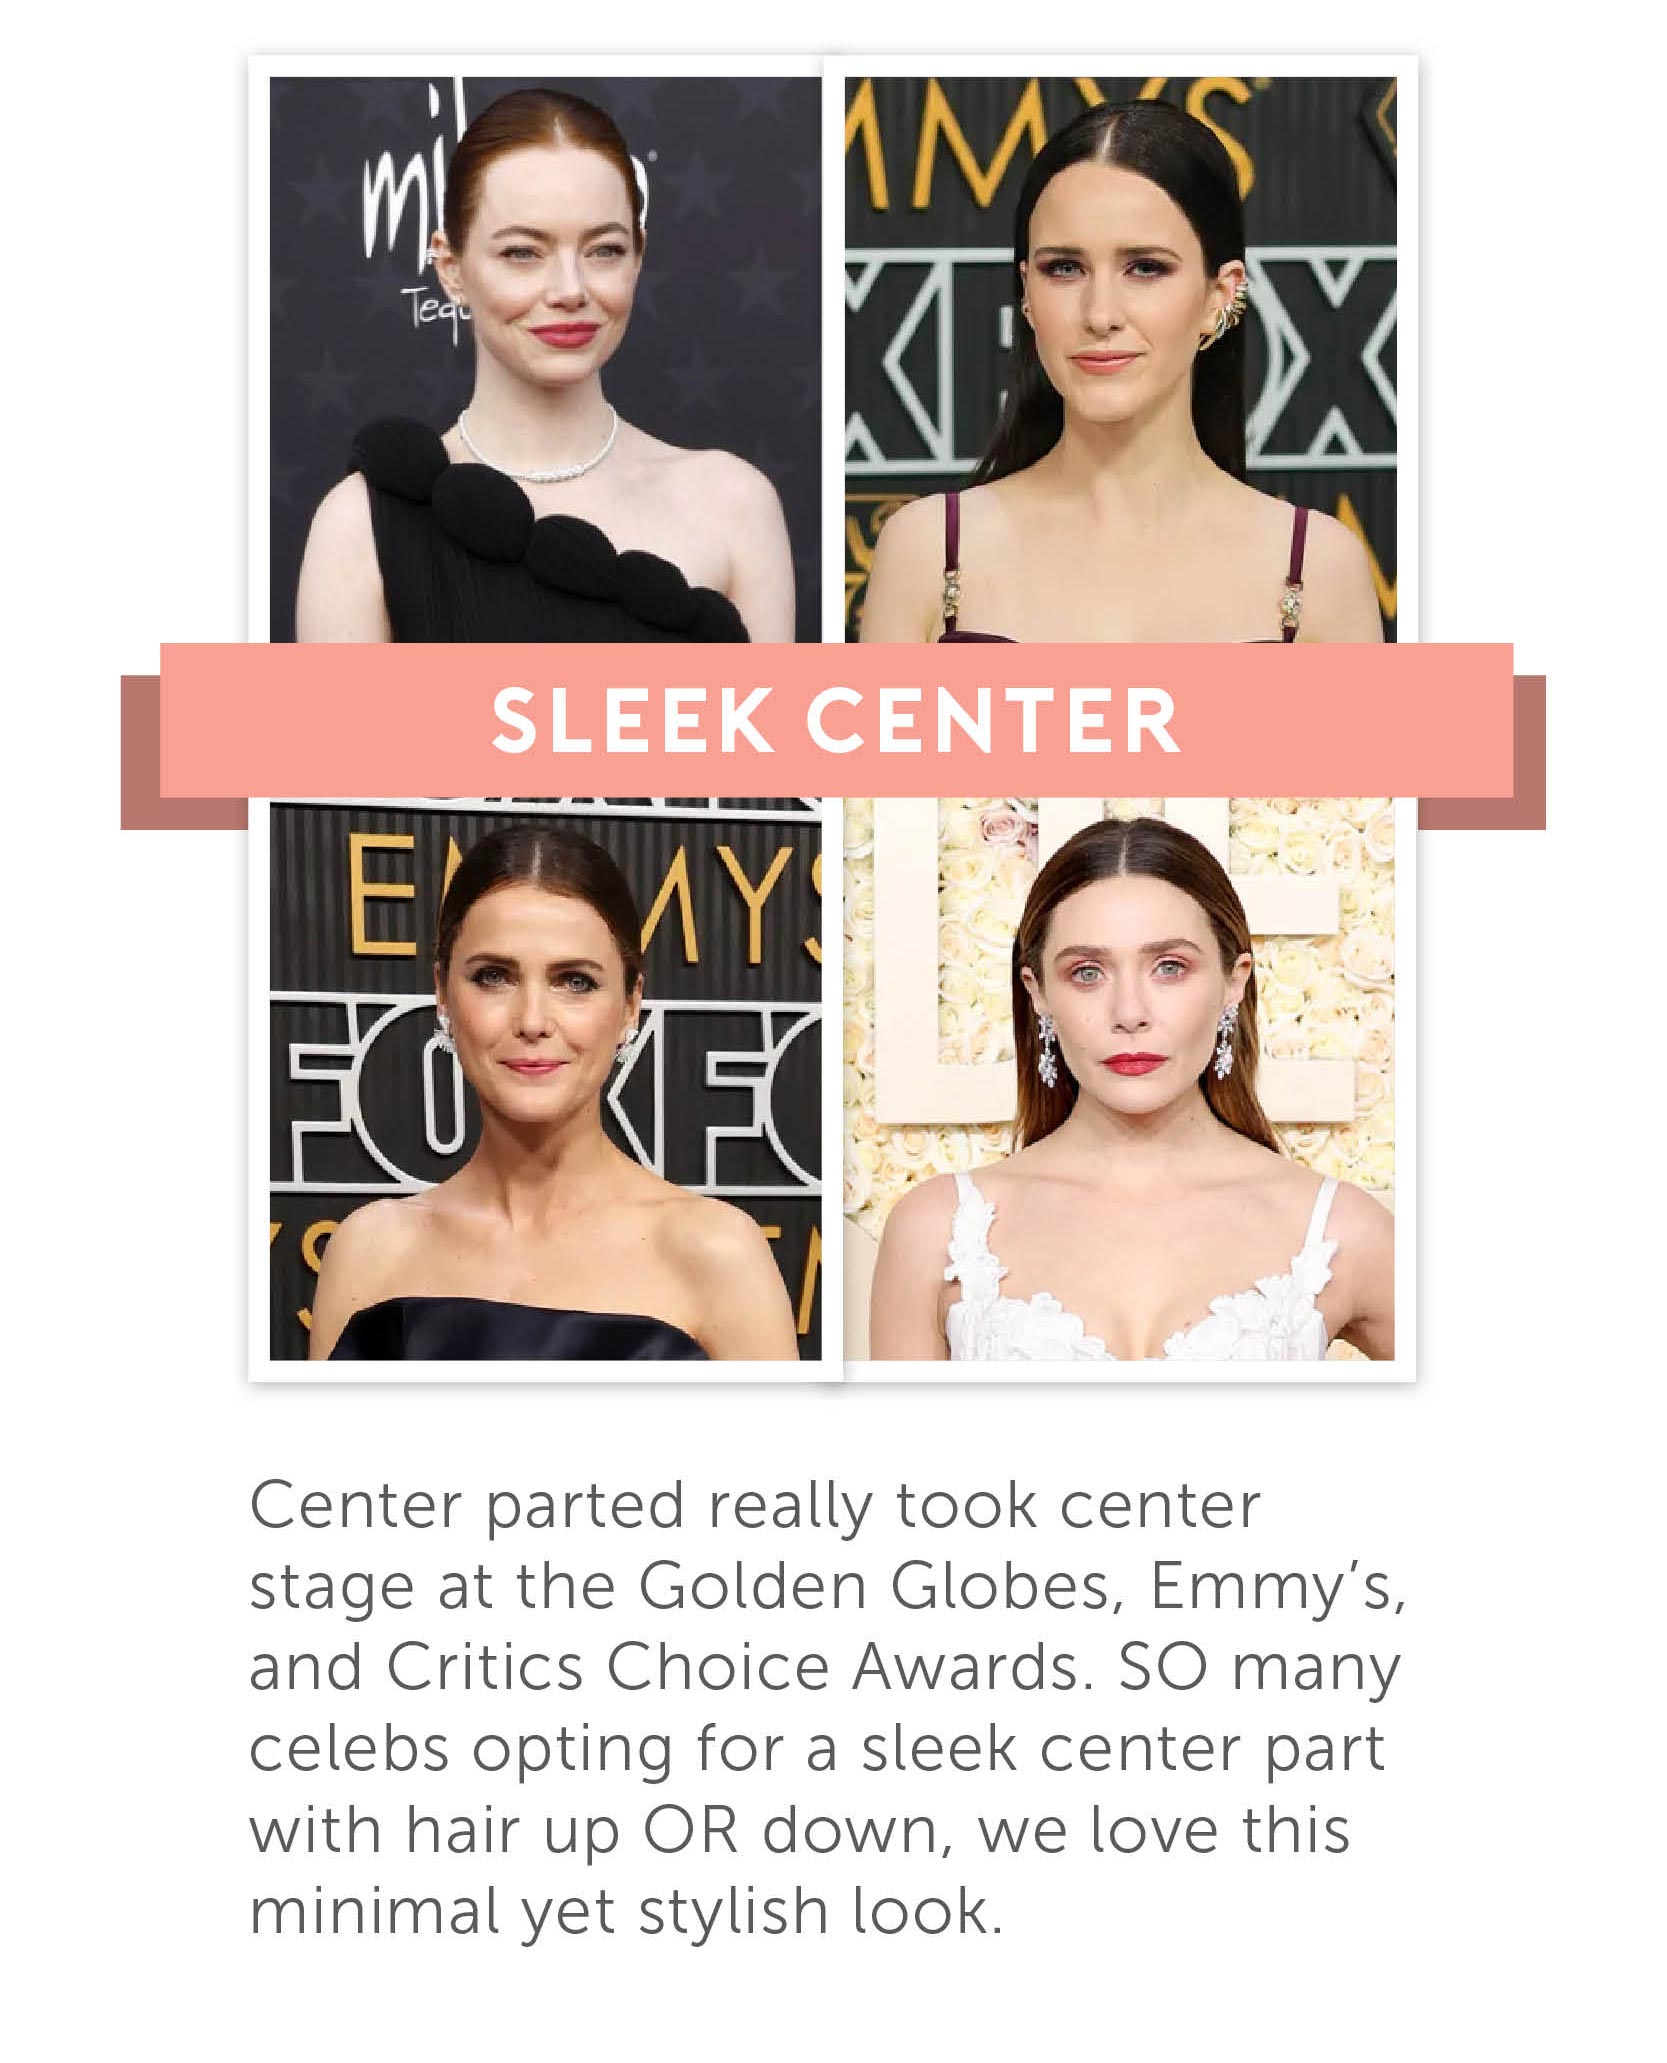 Sleek Center Center parted really took center stage at the Golden Globes, Emmy’s, and Critics Choice Awards. SO many celebs opting for a sleep center part with hair up OR down, we love this minimal yet stylish look.